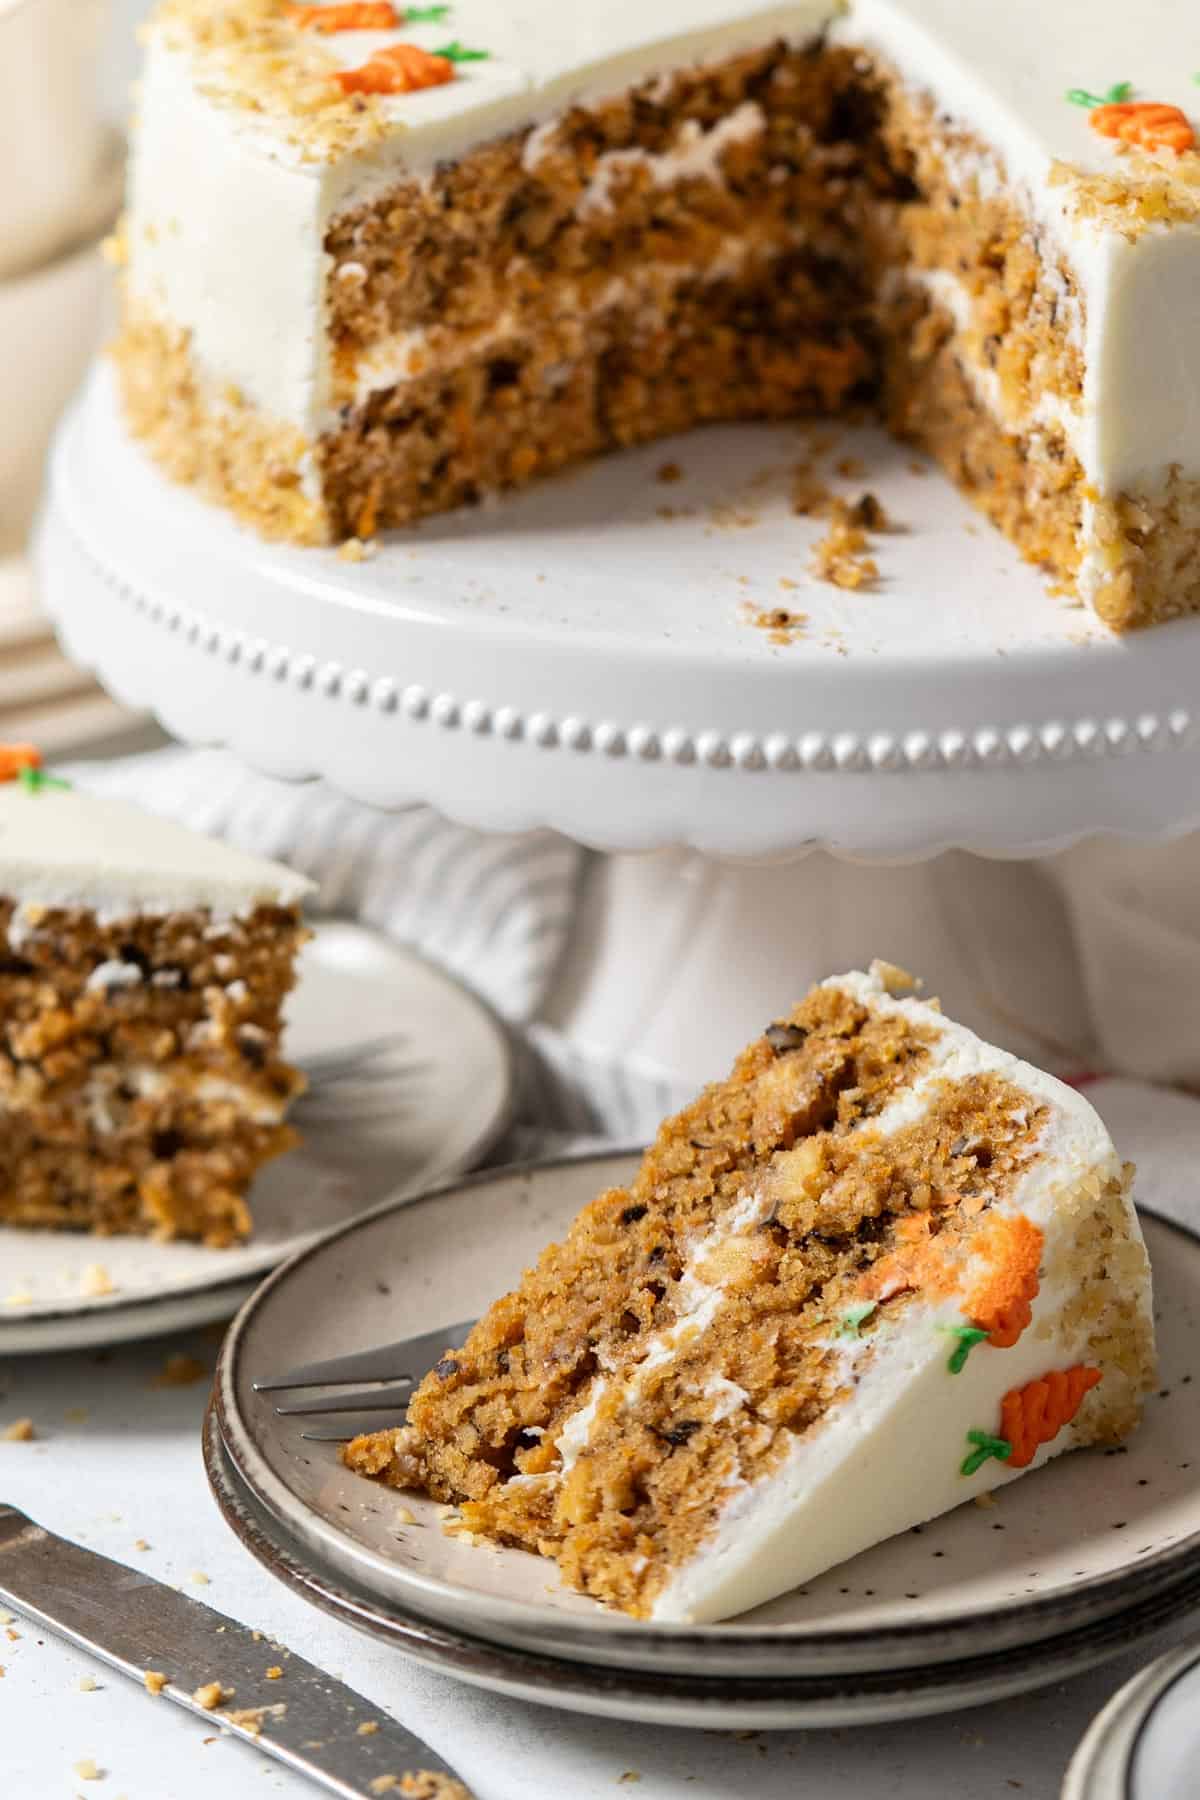 A portion of carrot cake in front of a cake stand.